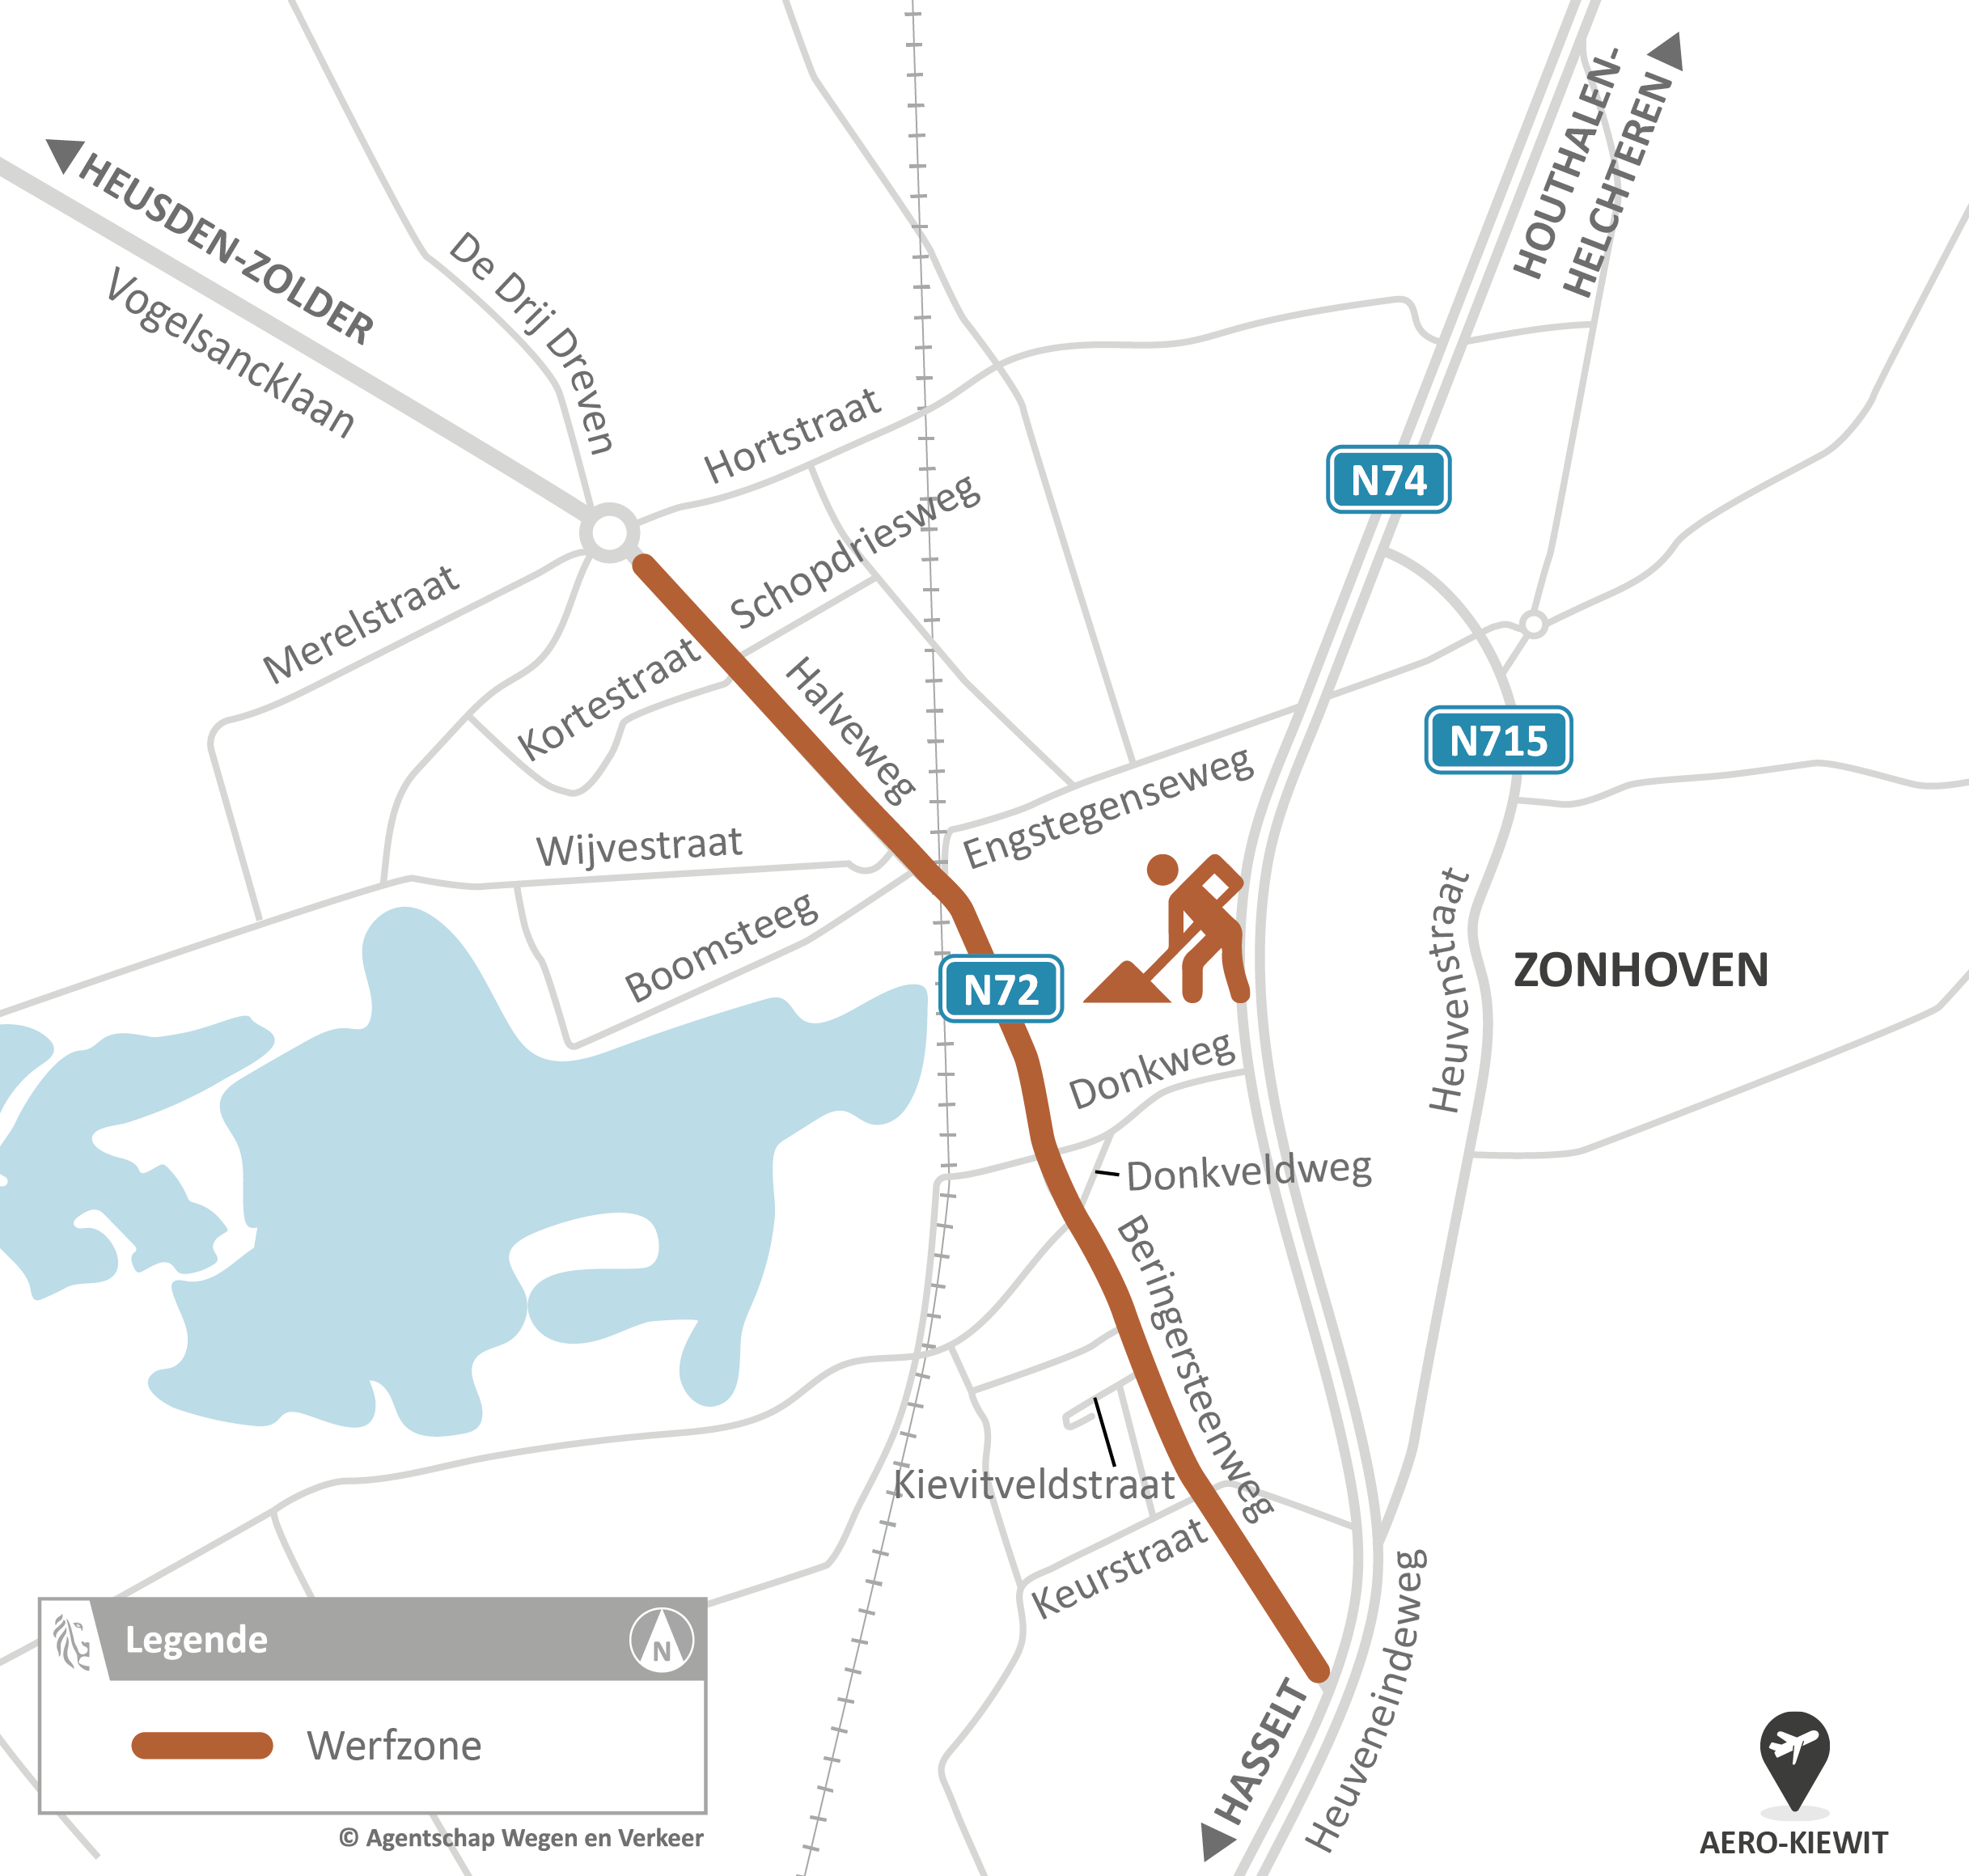 N72 Zonhoven - projectzone 